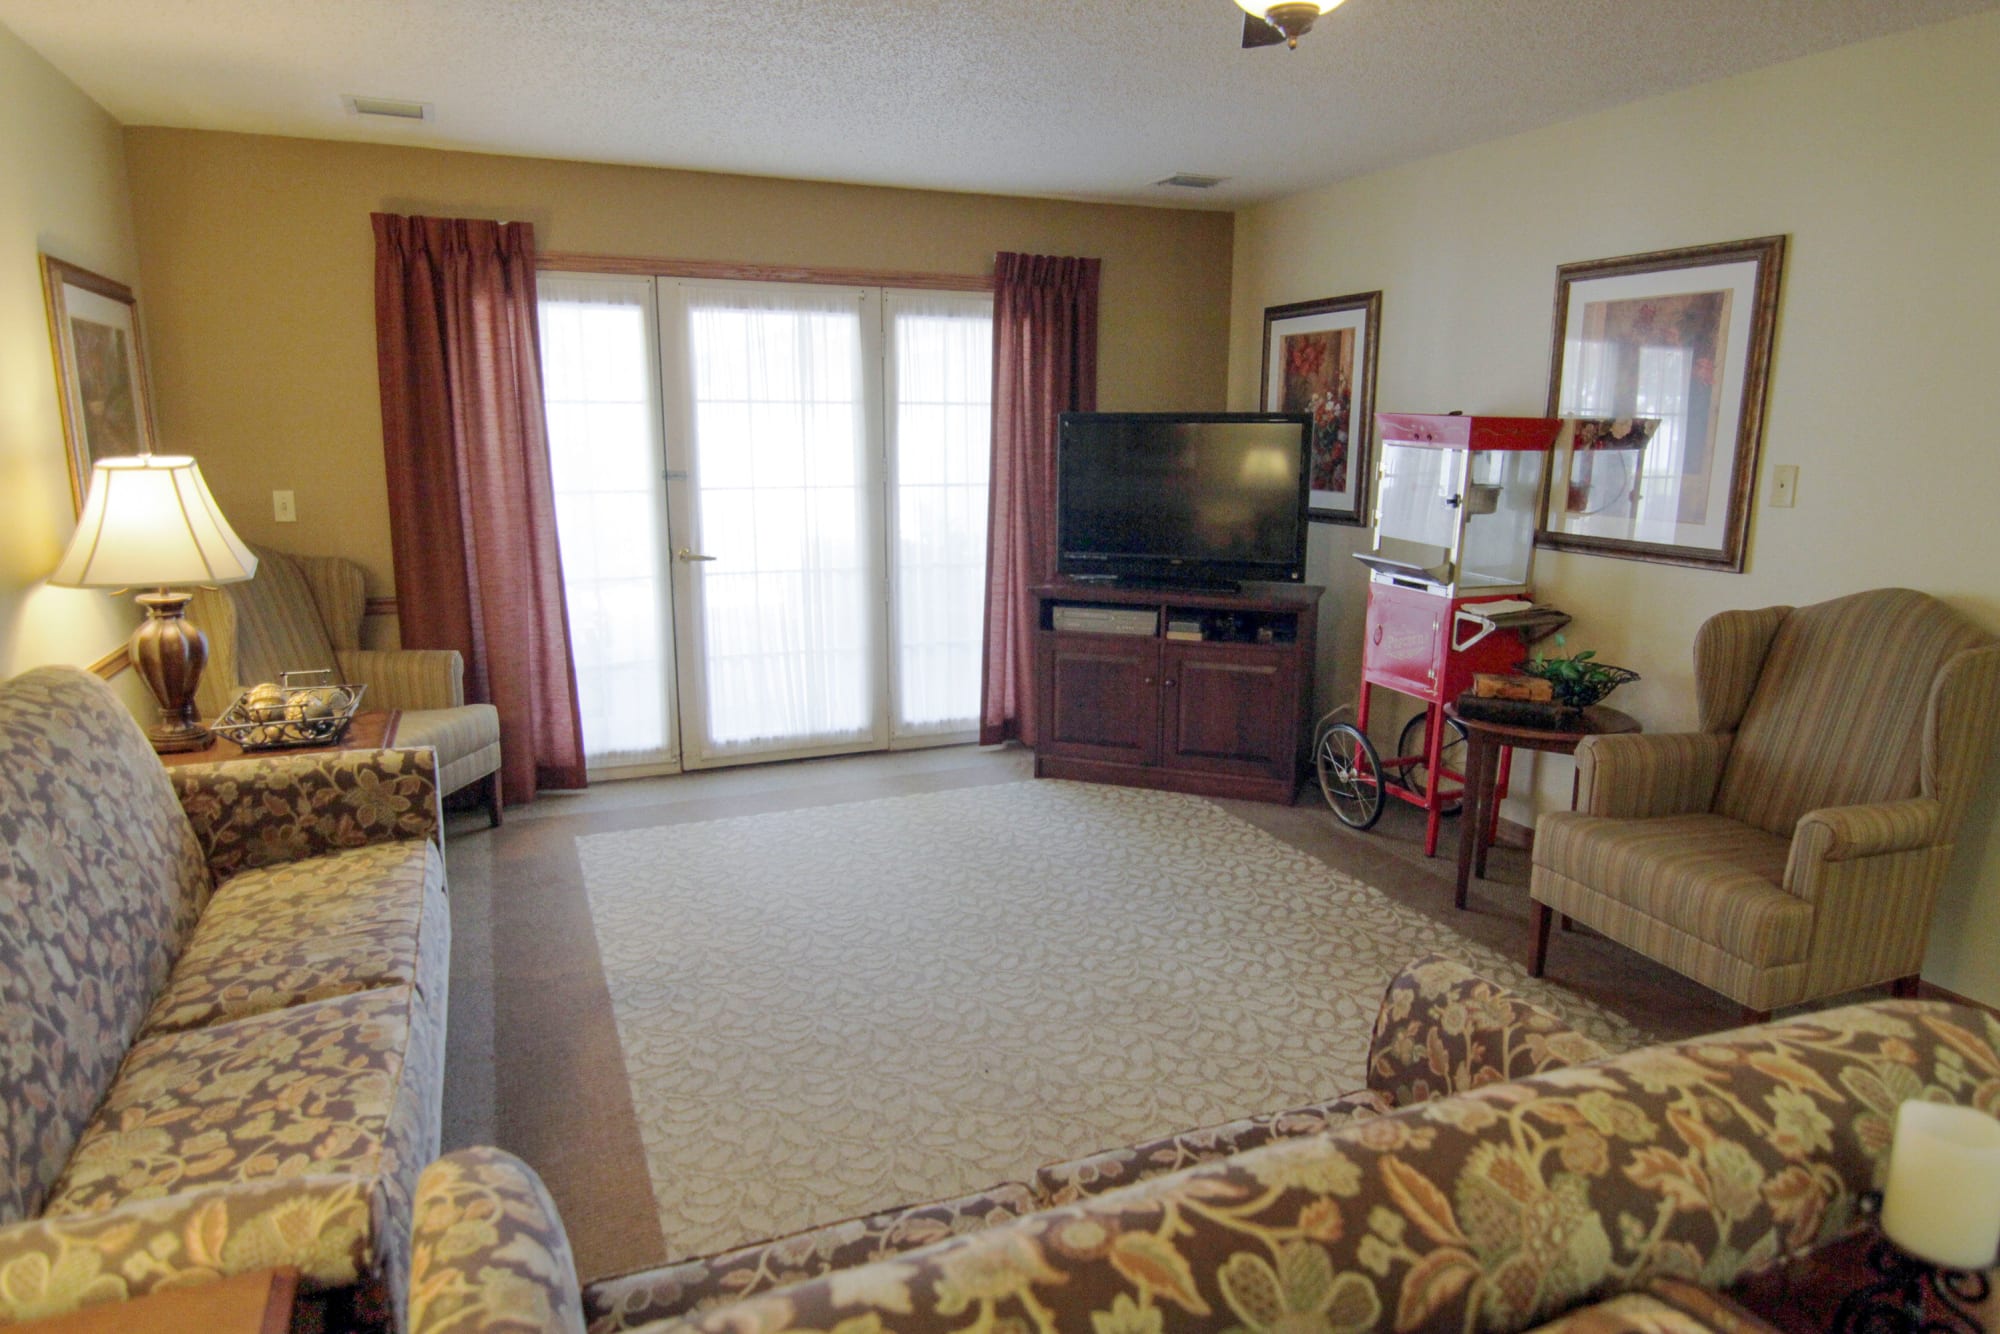 Lounge with a popcorn machine at Oxford Springs Tulsa Assisted Living in Tulsa, Oklahoma